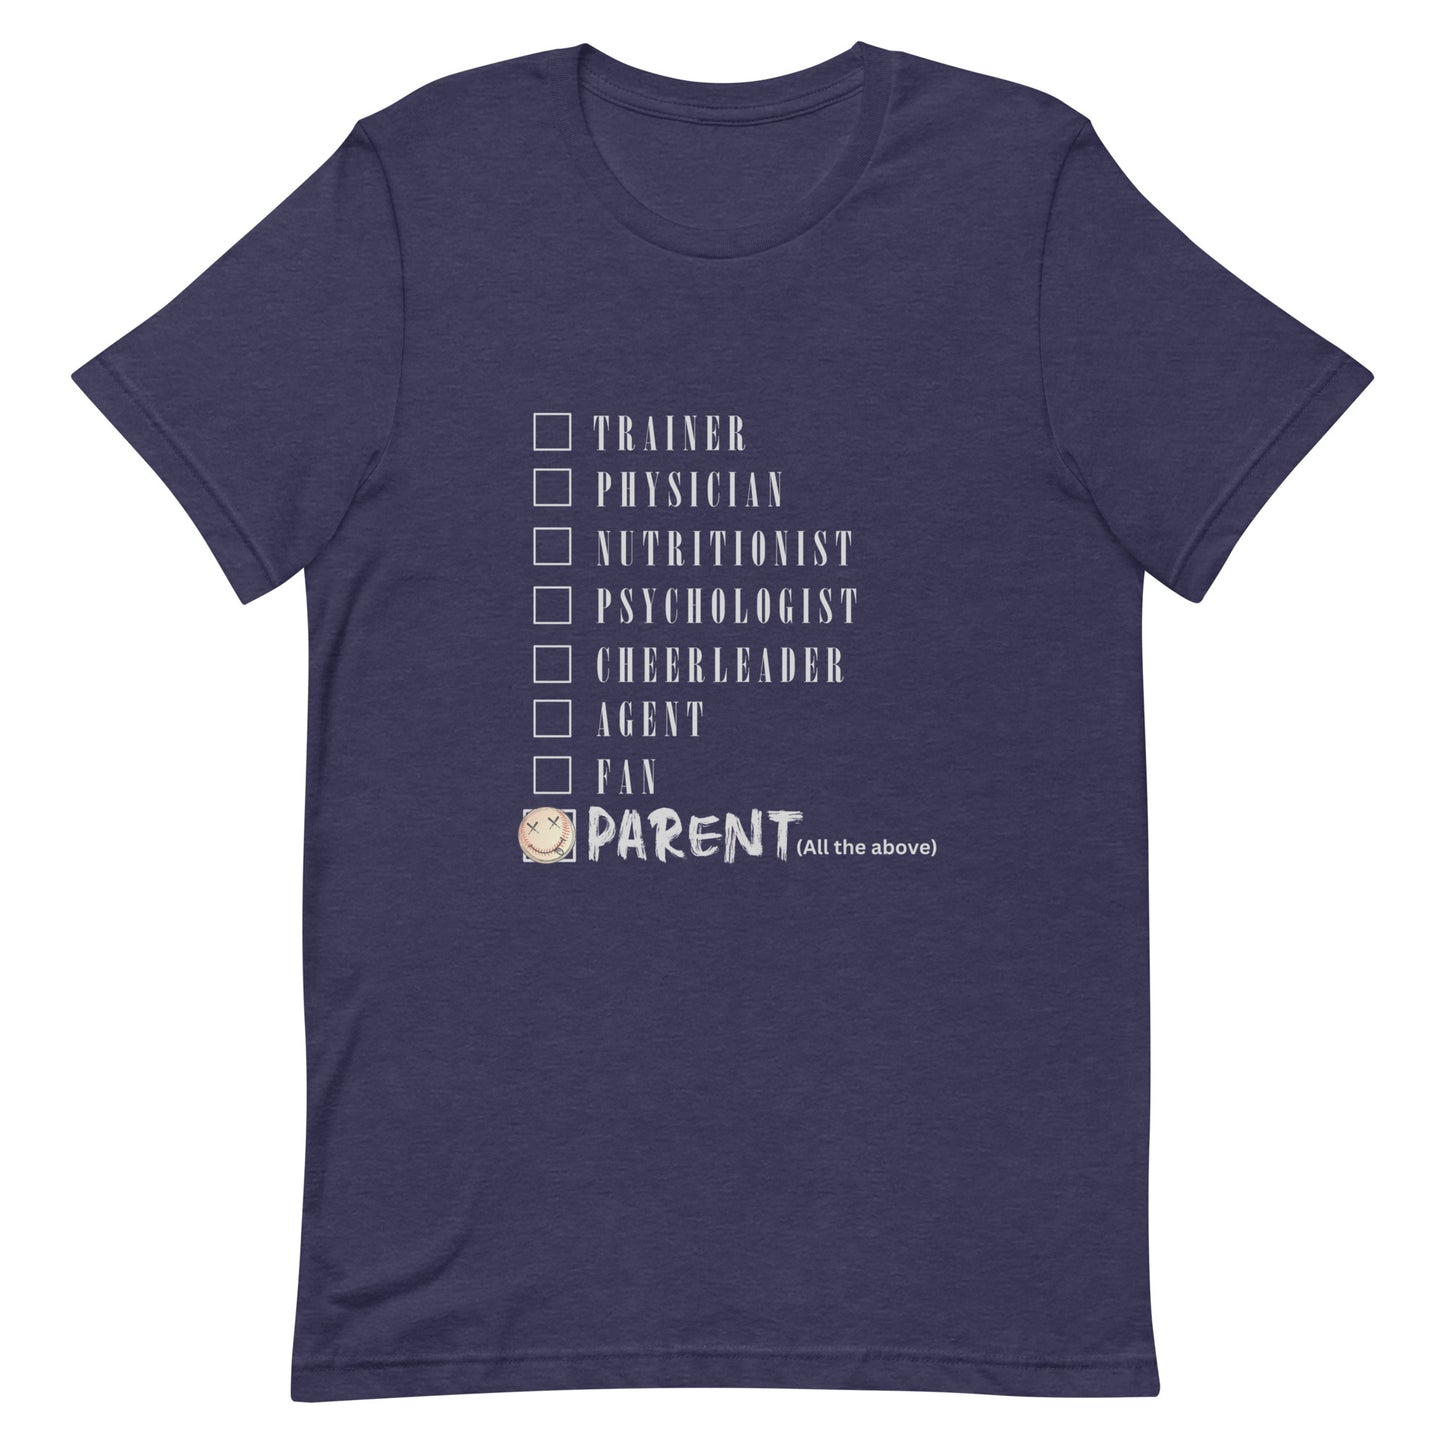 Dad's "Parents Are..." t-shirt